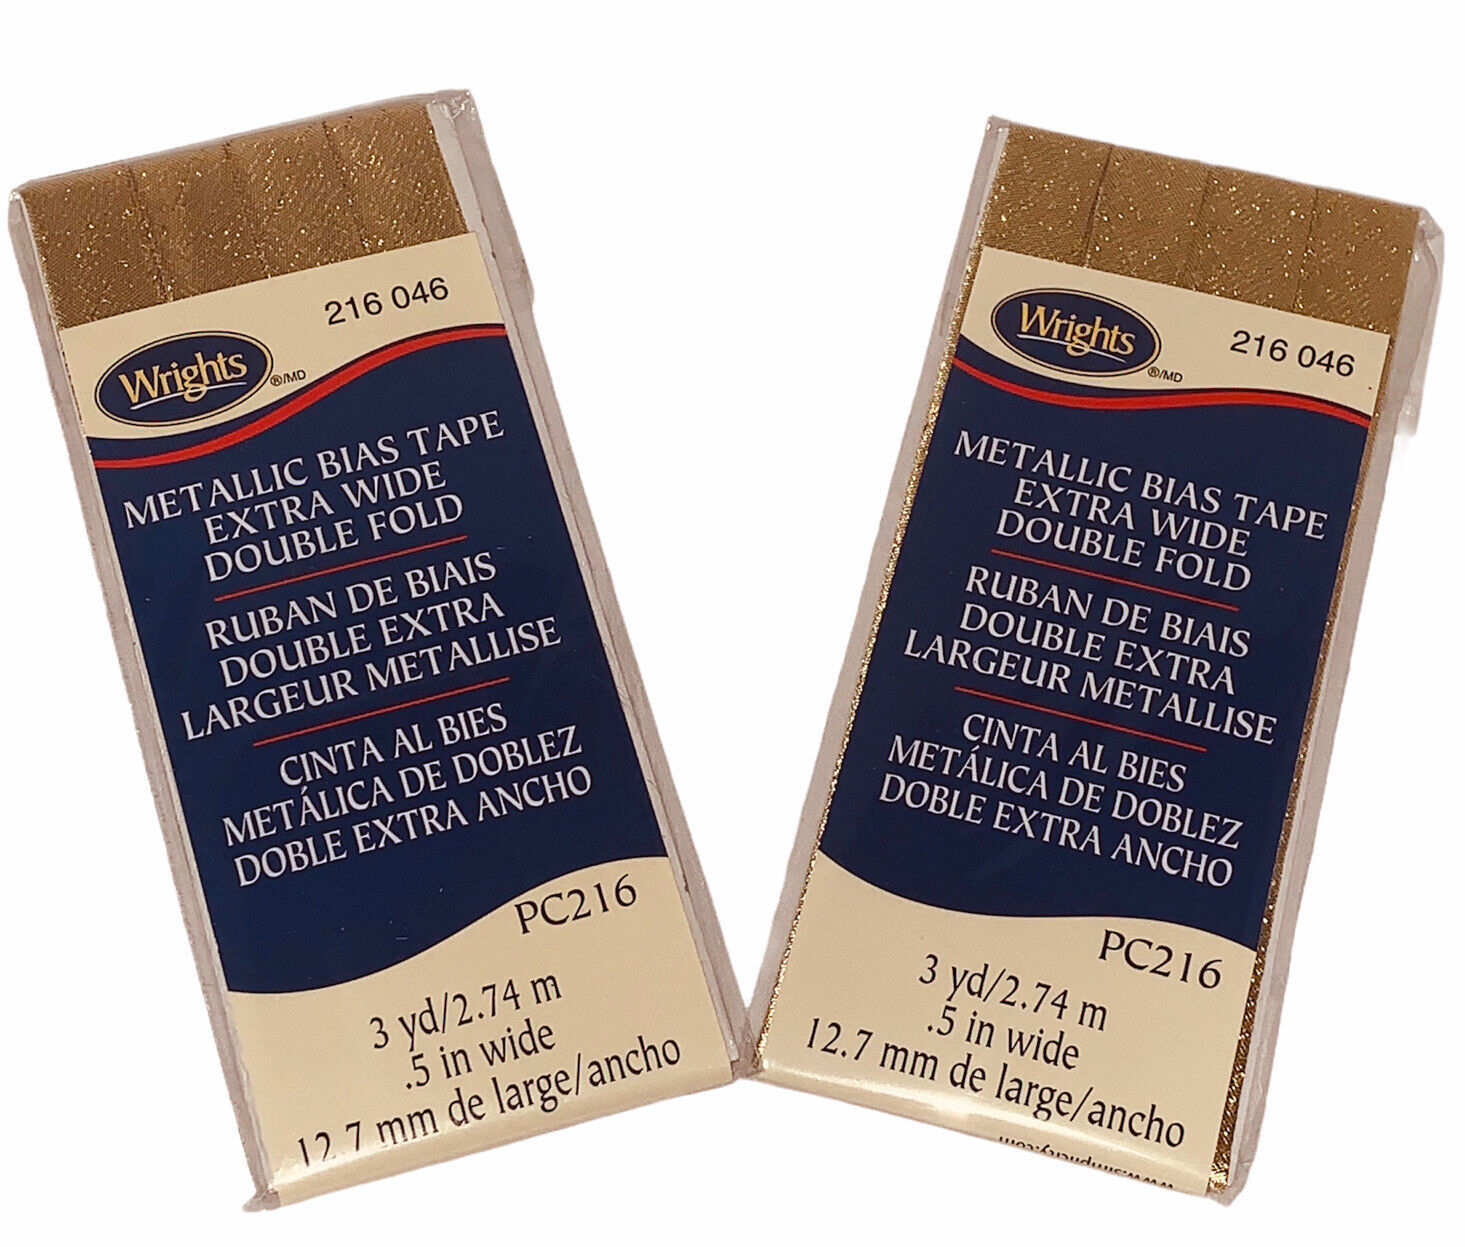 2 Packs Gold Metallic 1/2" Extra Wide Double Fold Bias Tape 216-046 PC216 6 Yds - $10.18